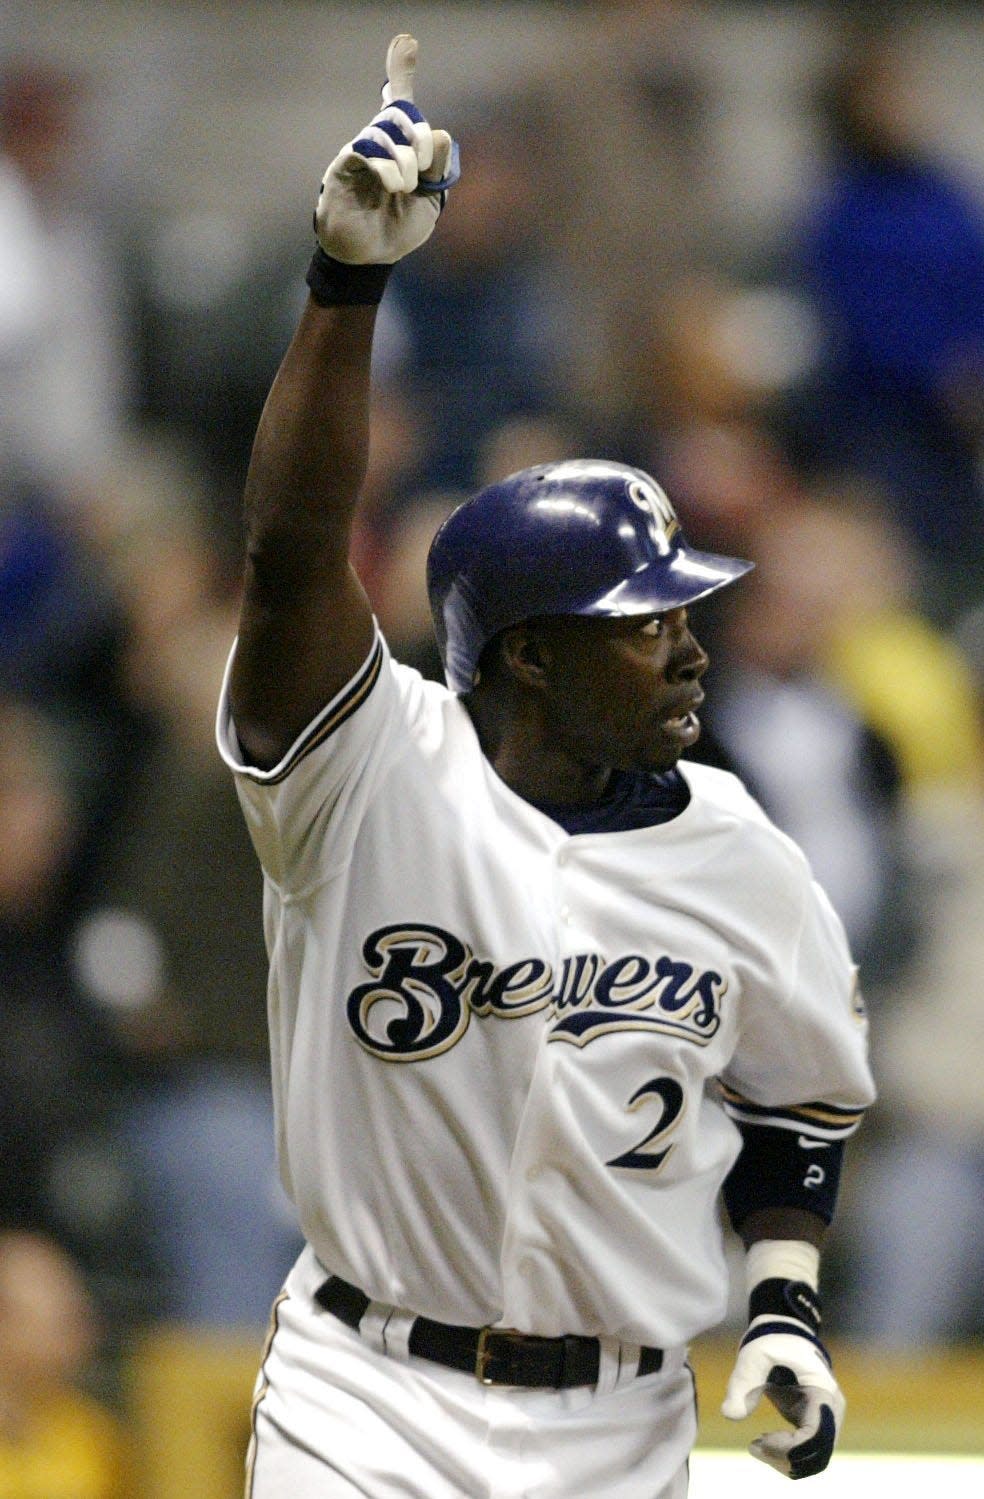 Bill Hall reacts to his ninth-inning, two-run homer to beat Cincinnati Tuesday April 27, 2004.